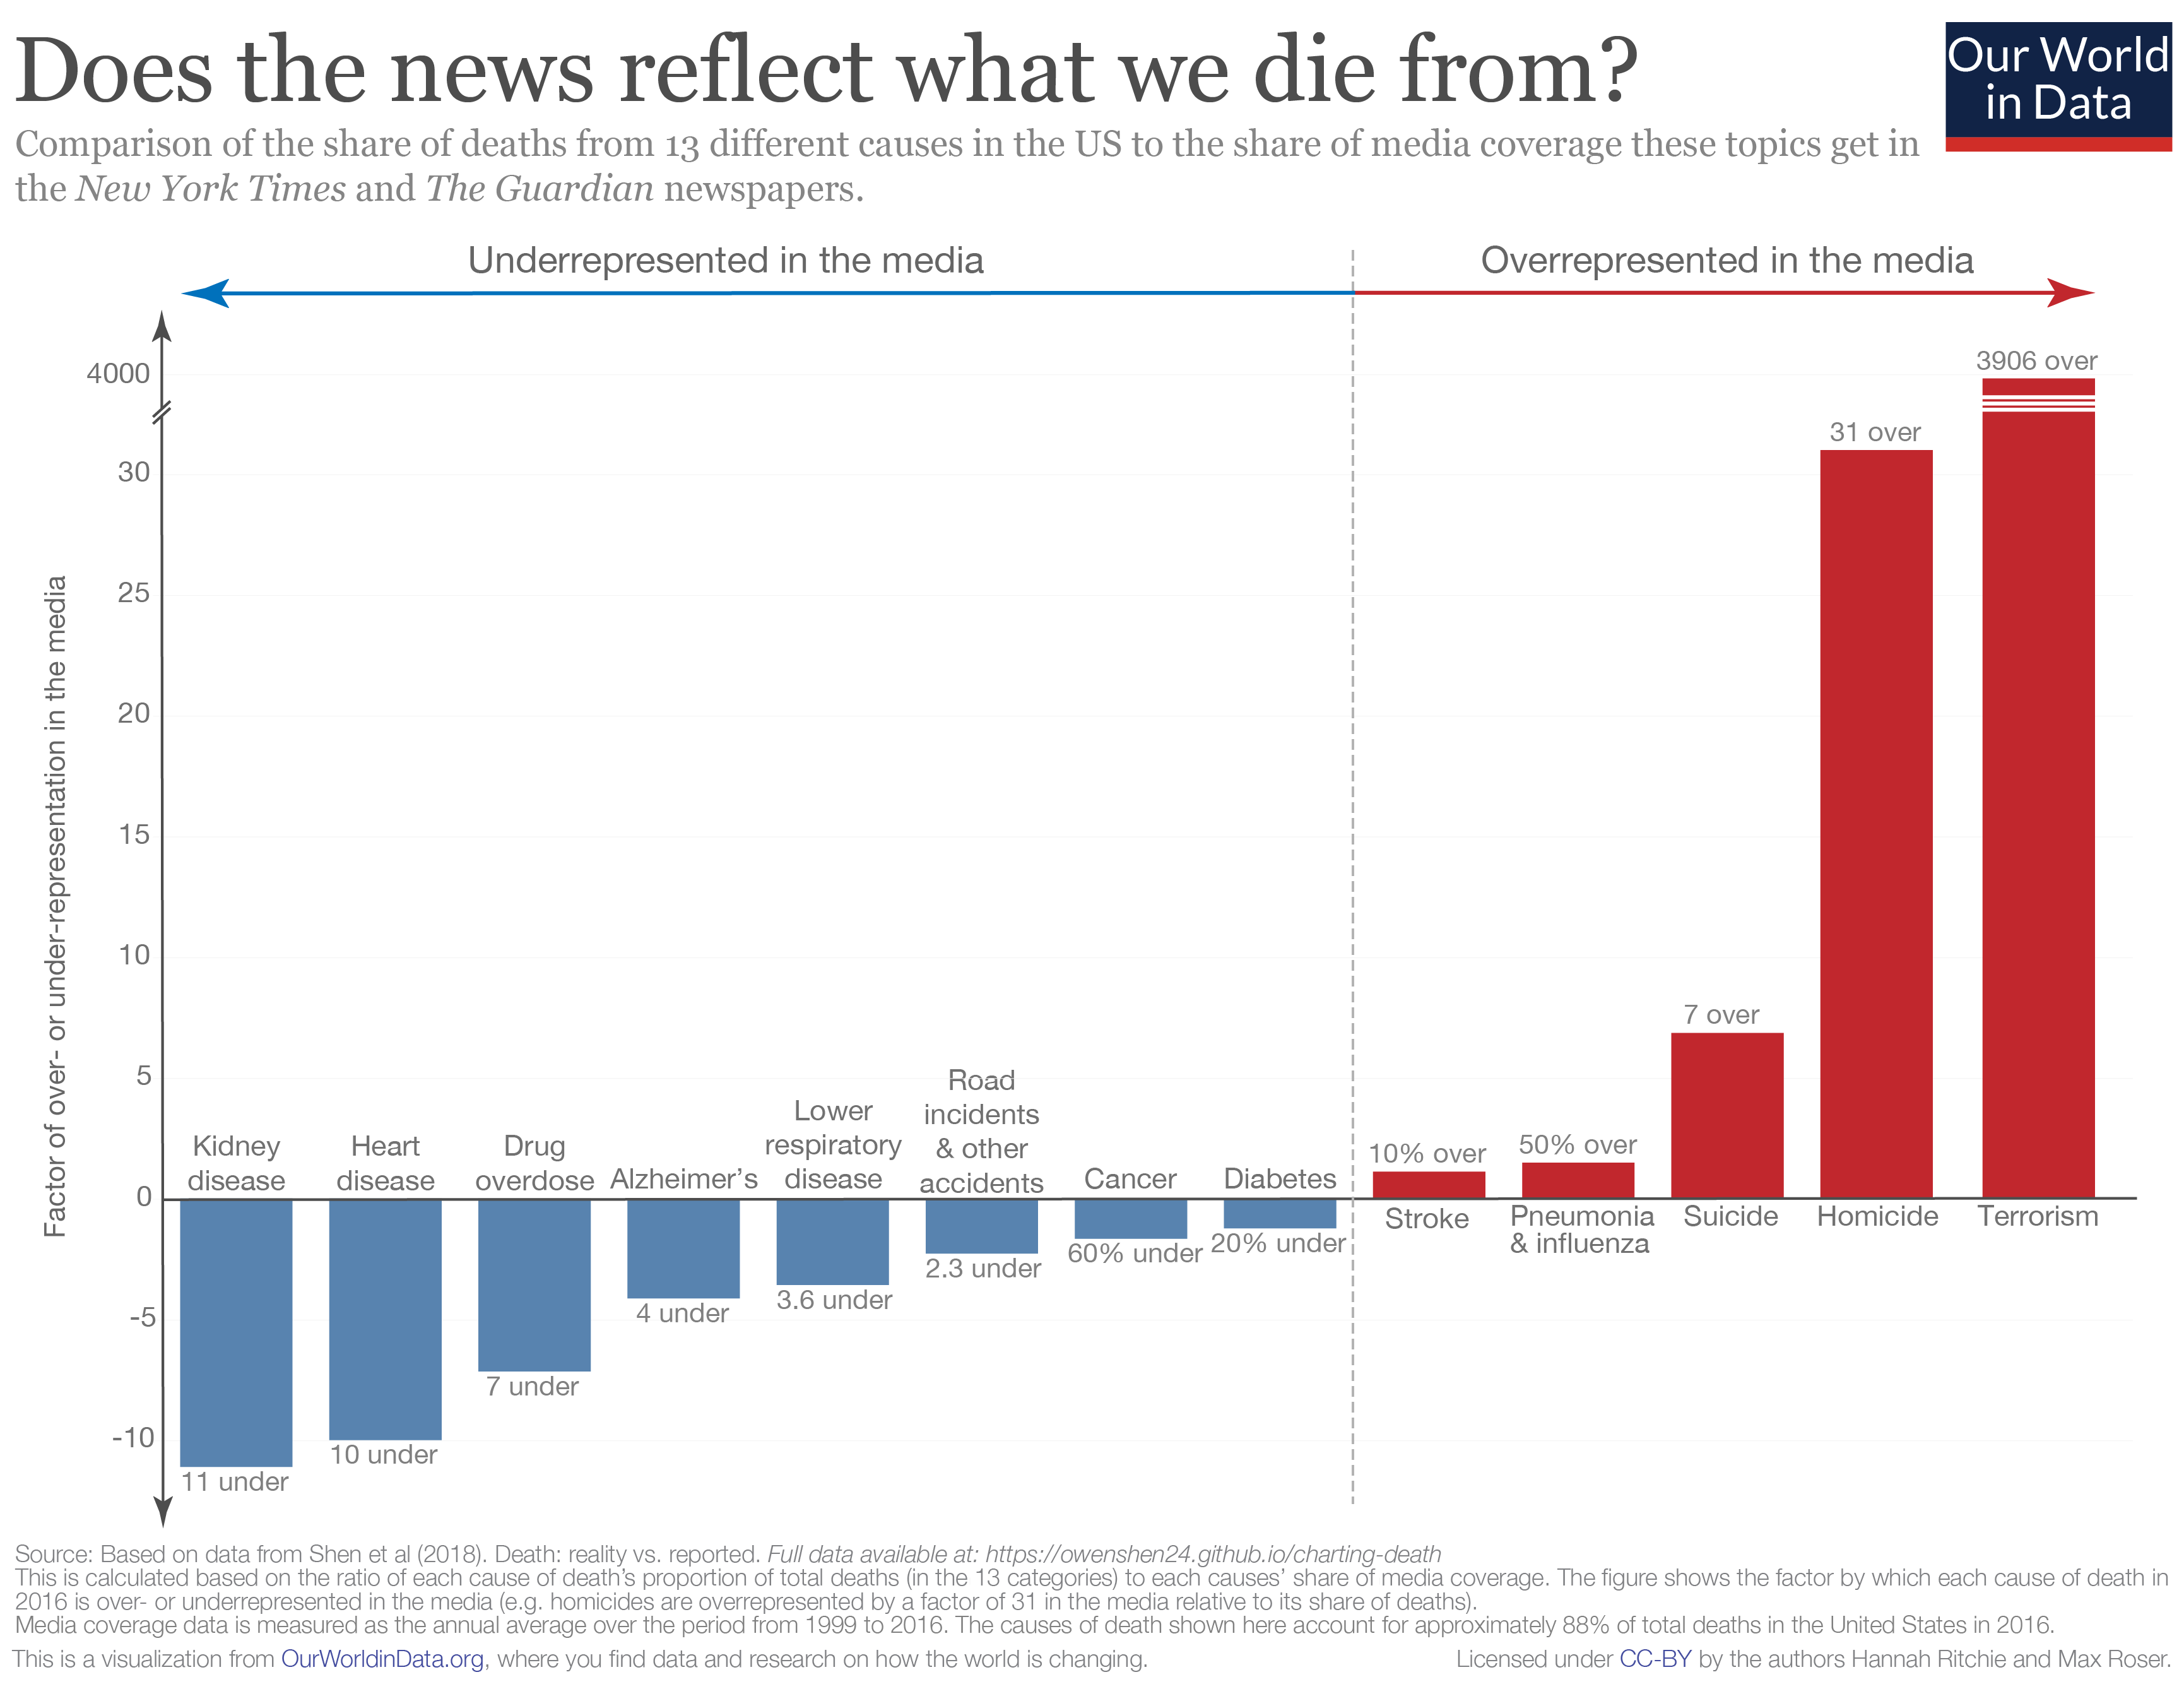 Does the news reflect what we die from?